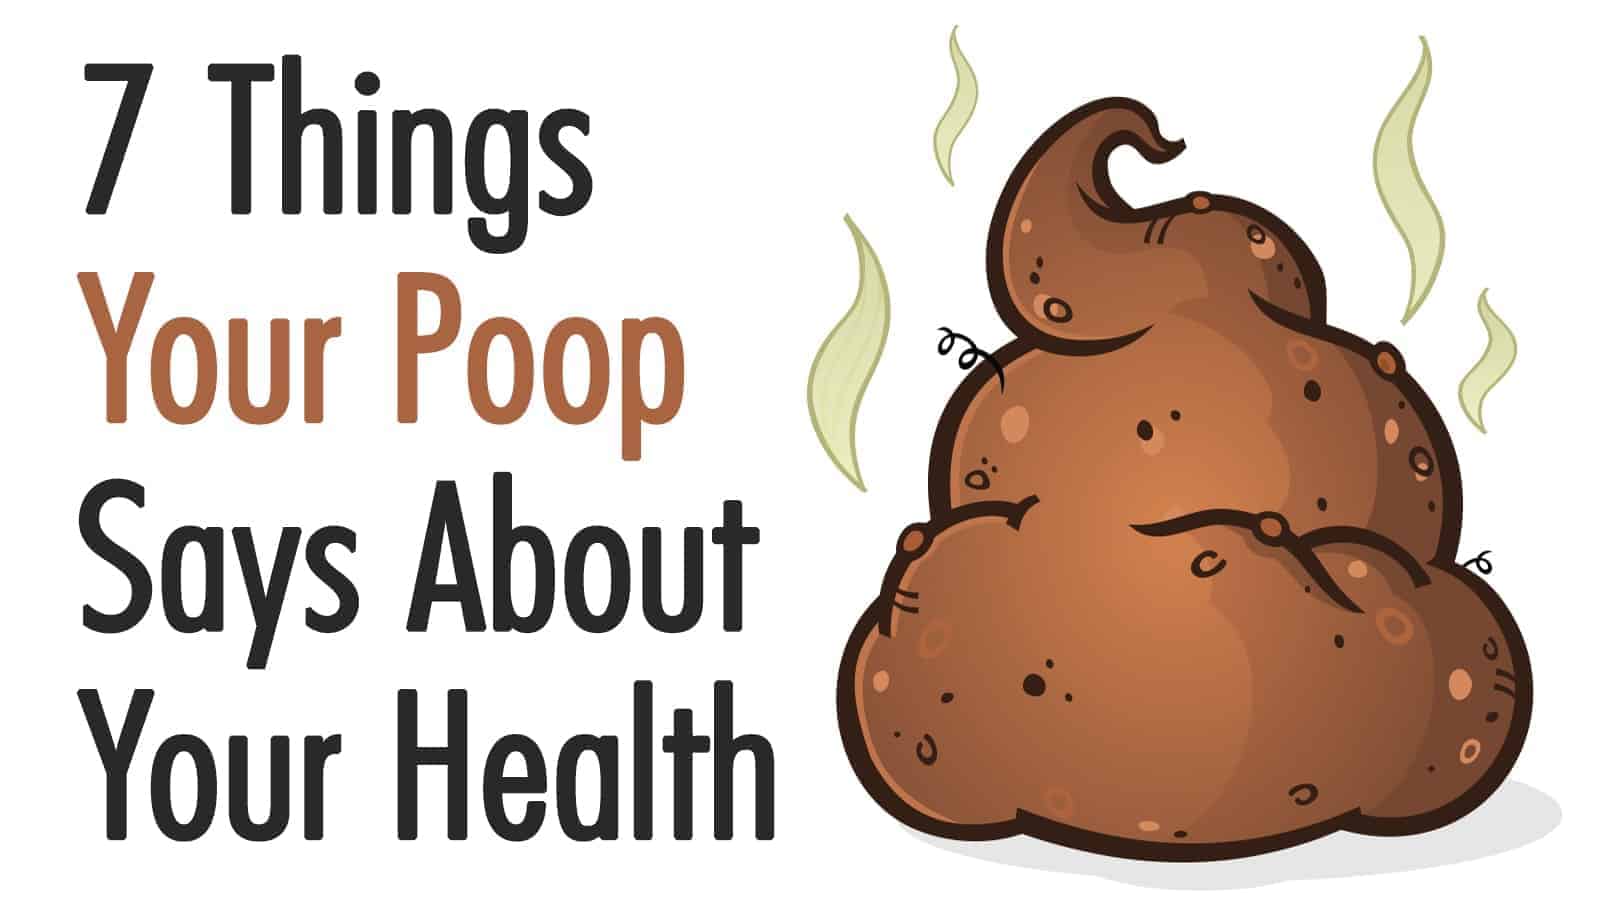 7 Things Your Poop Says About Your Health